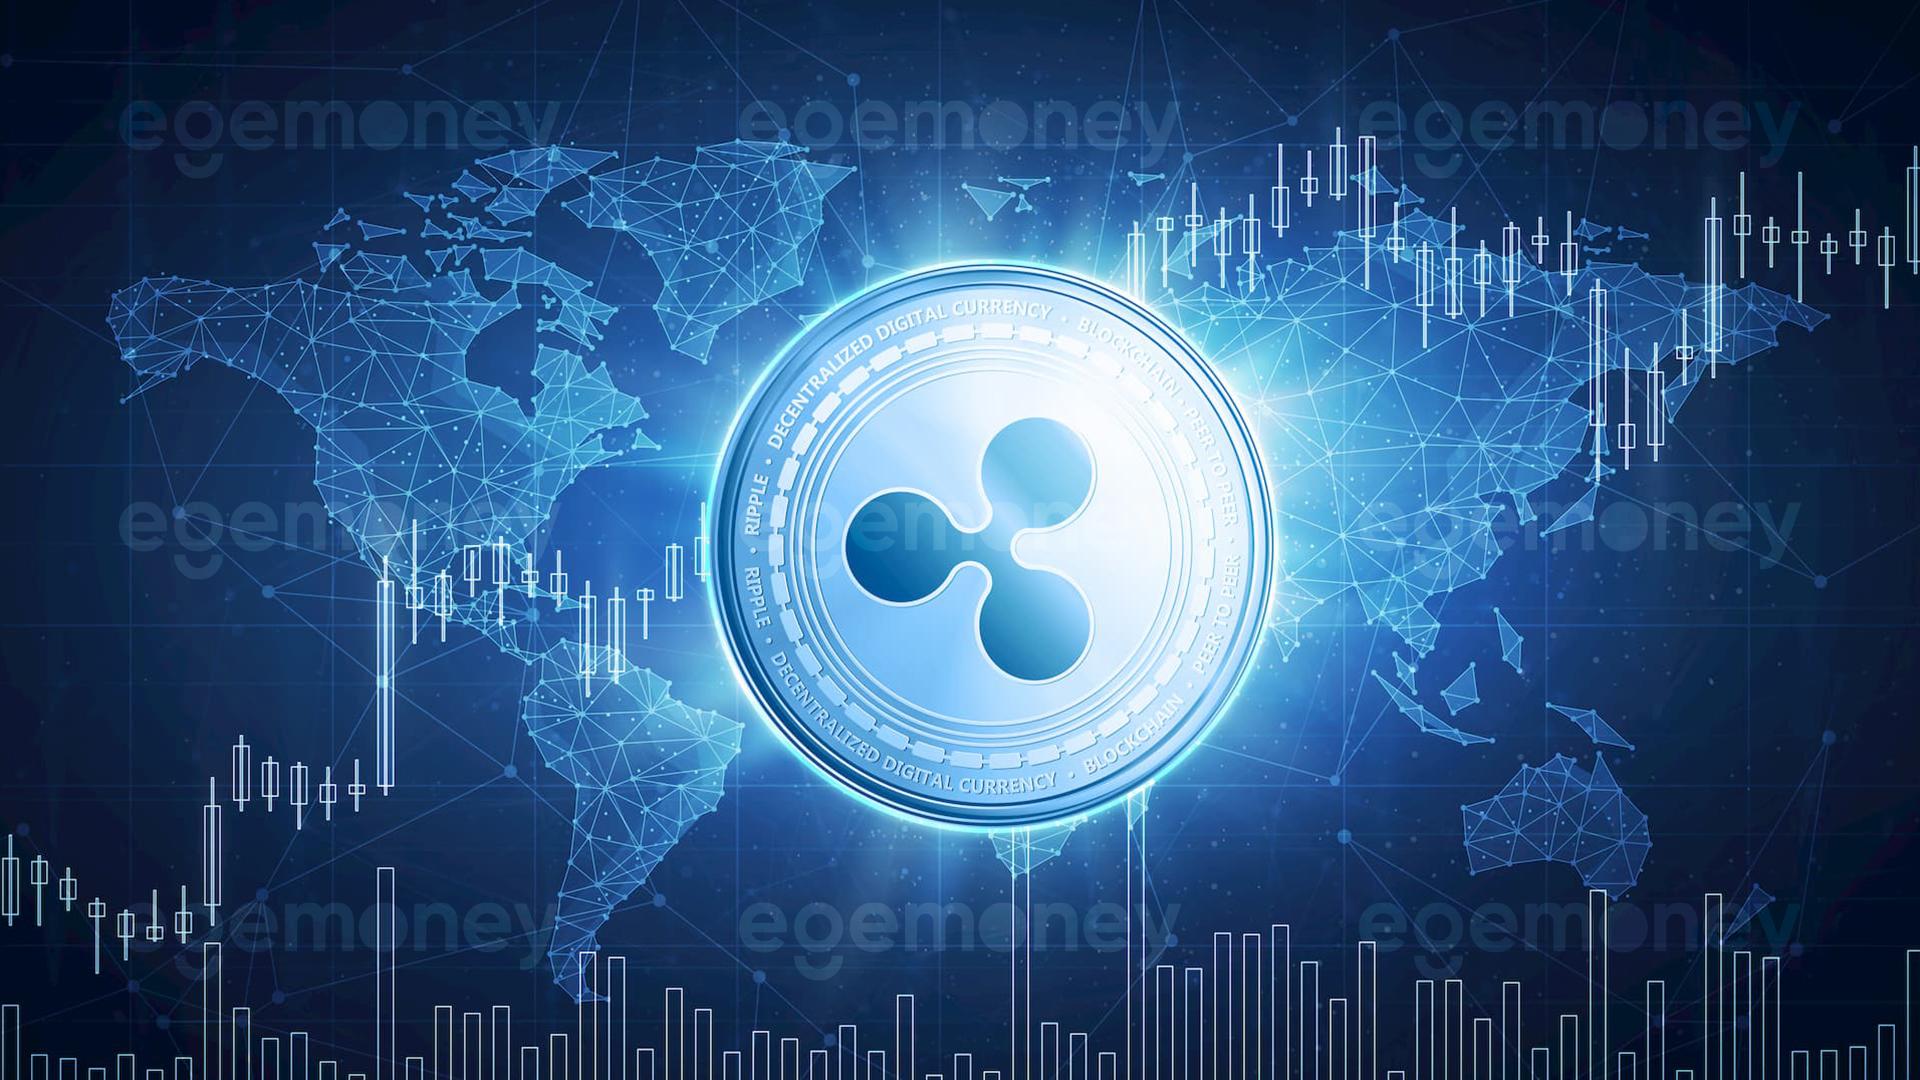 Victory for Ripple in the SEC Case: XRP Price Soars After Favorable Decision